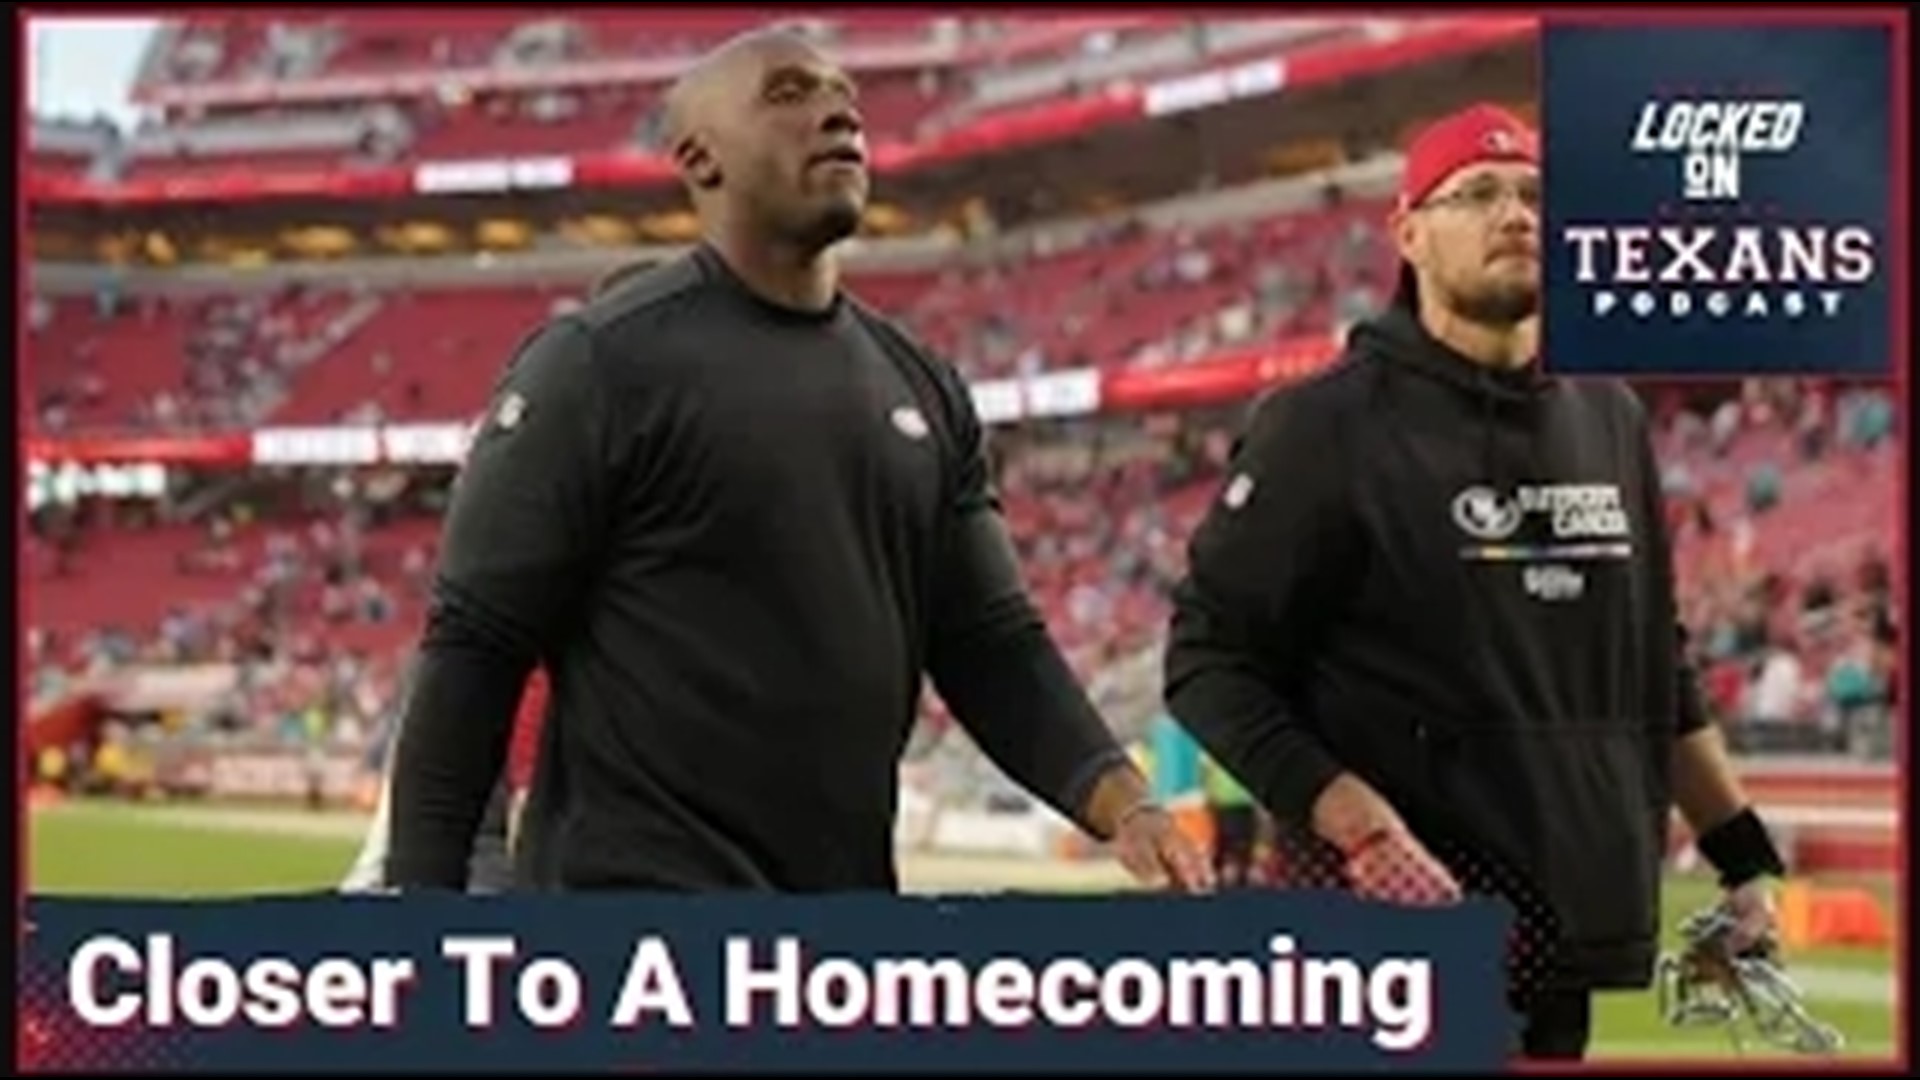 On this Monday's installment of Locked On Texans, the Houston Texans completed an interview with San Francisco 49ers defensive coordinator DeMeco Ryans.